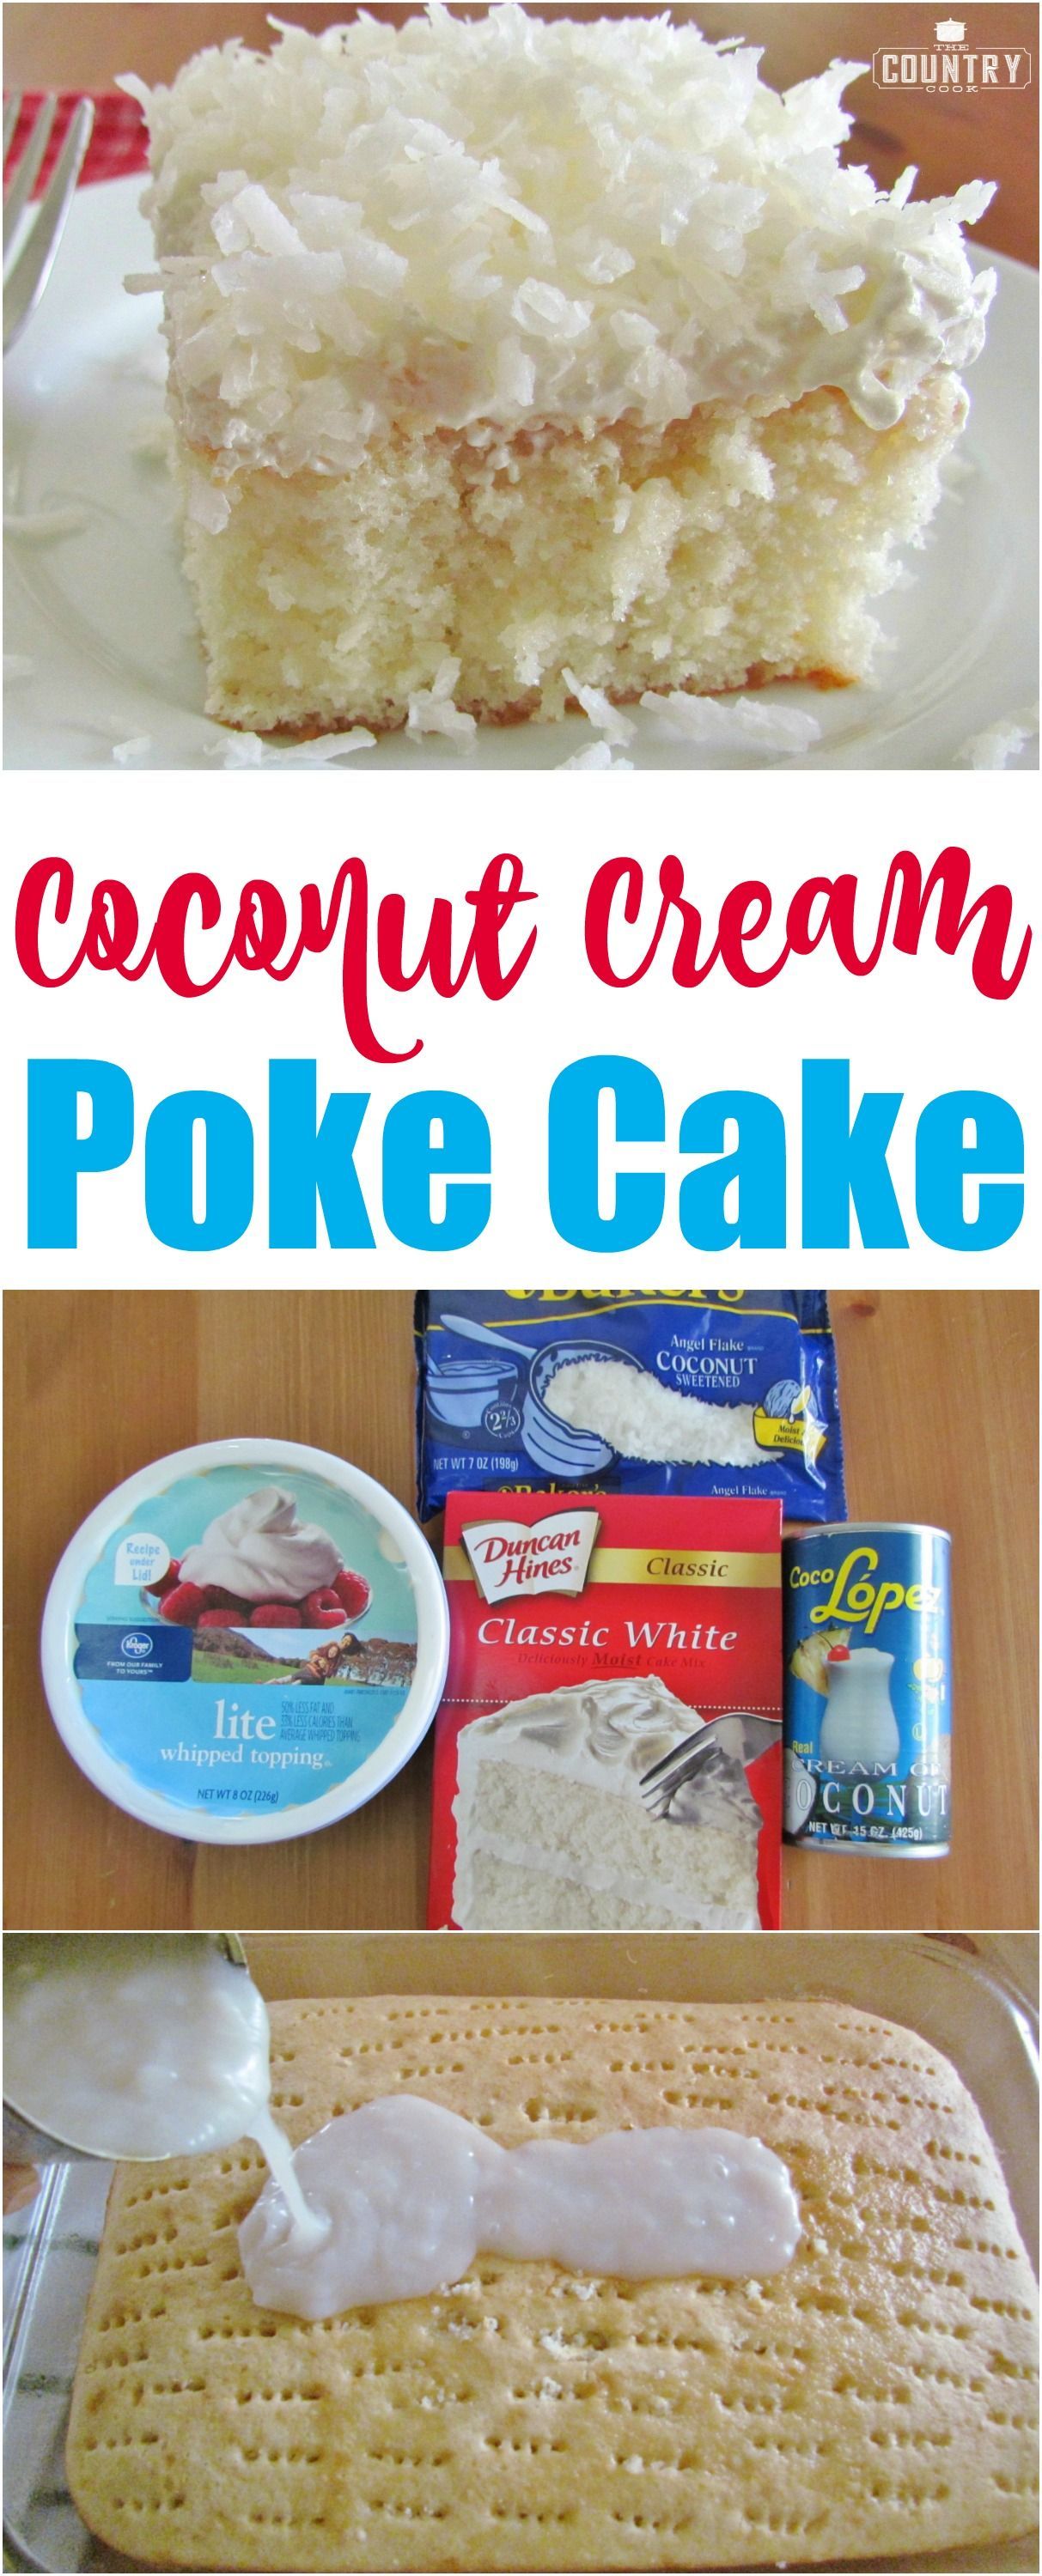 Coconut Cream Poke Cake recipe from The Country Cook -   23 coconut cake recipes
 ideas